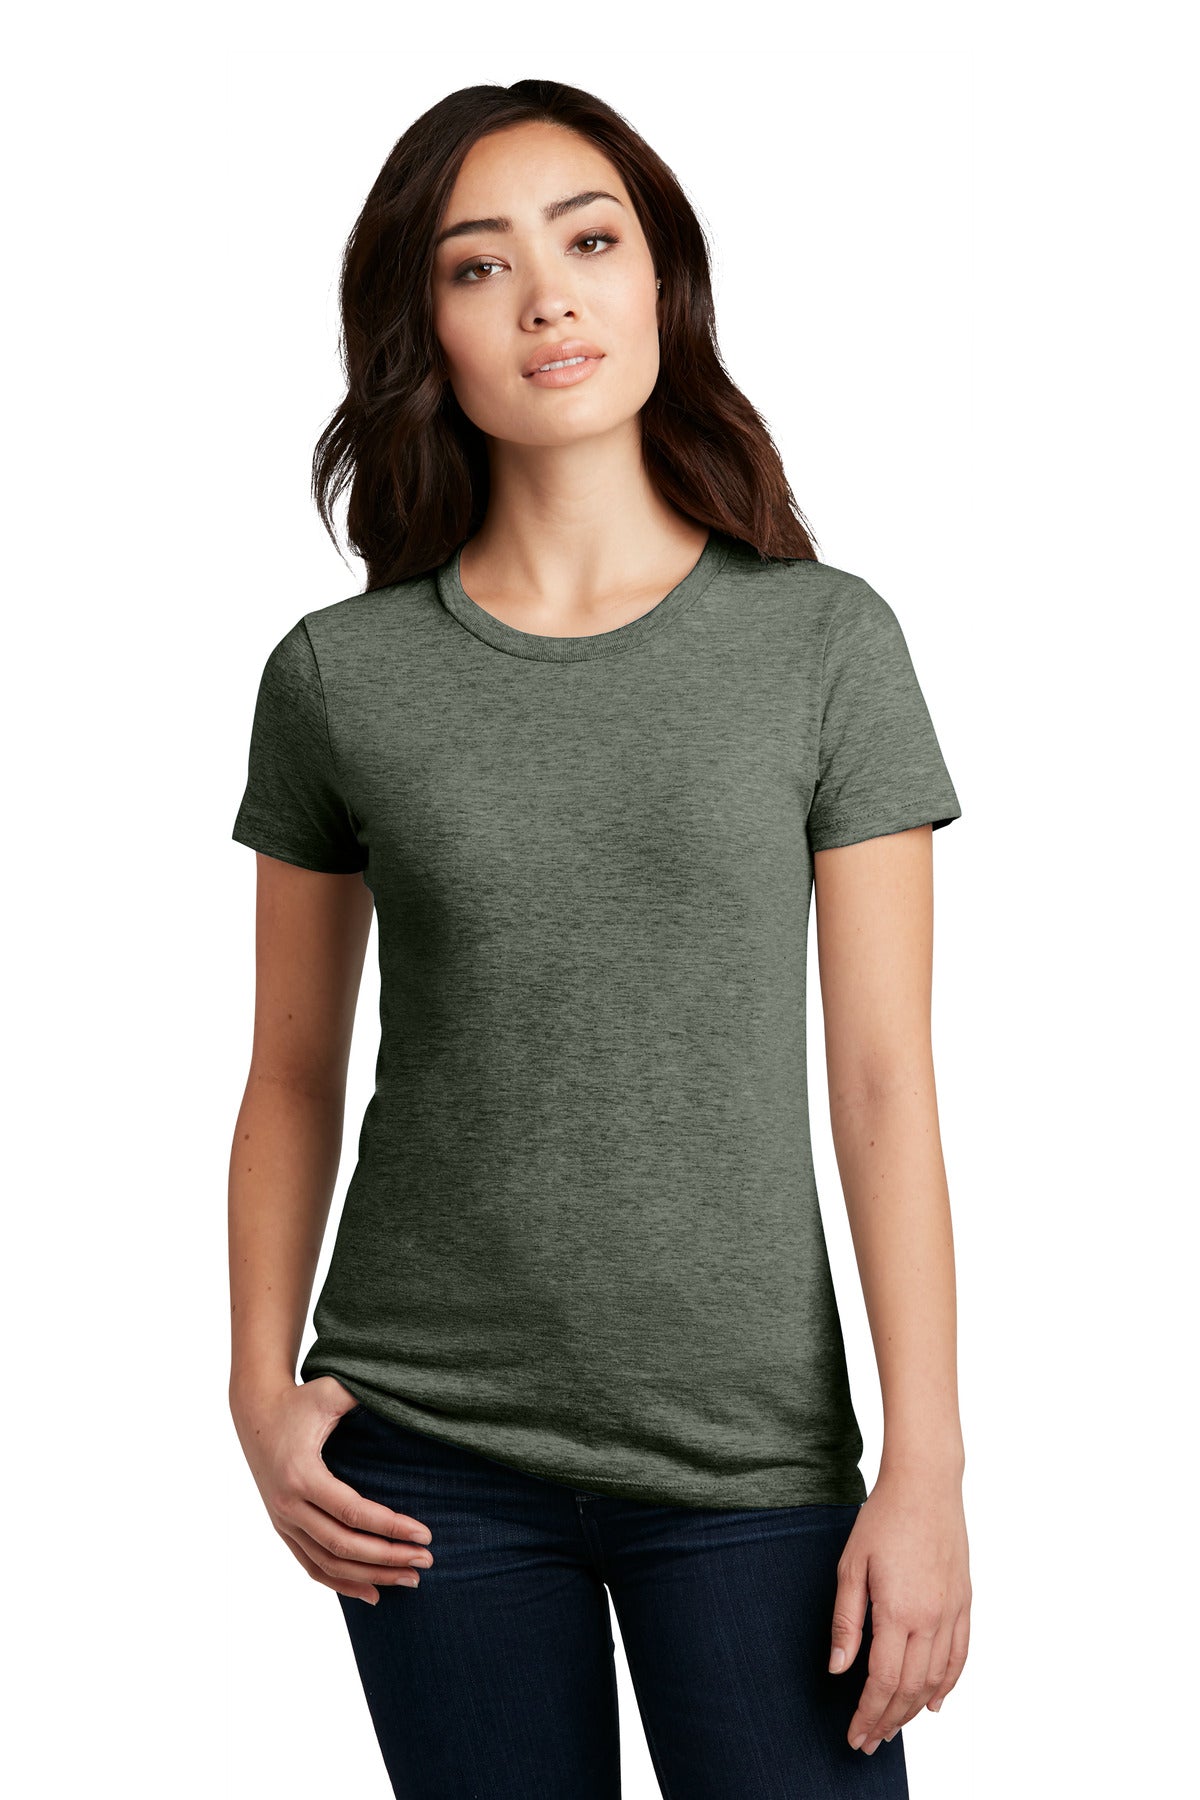 Photo of District Ladies DM108L  color  Heathered Olive